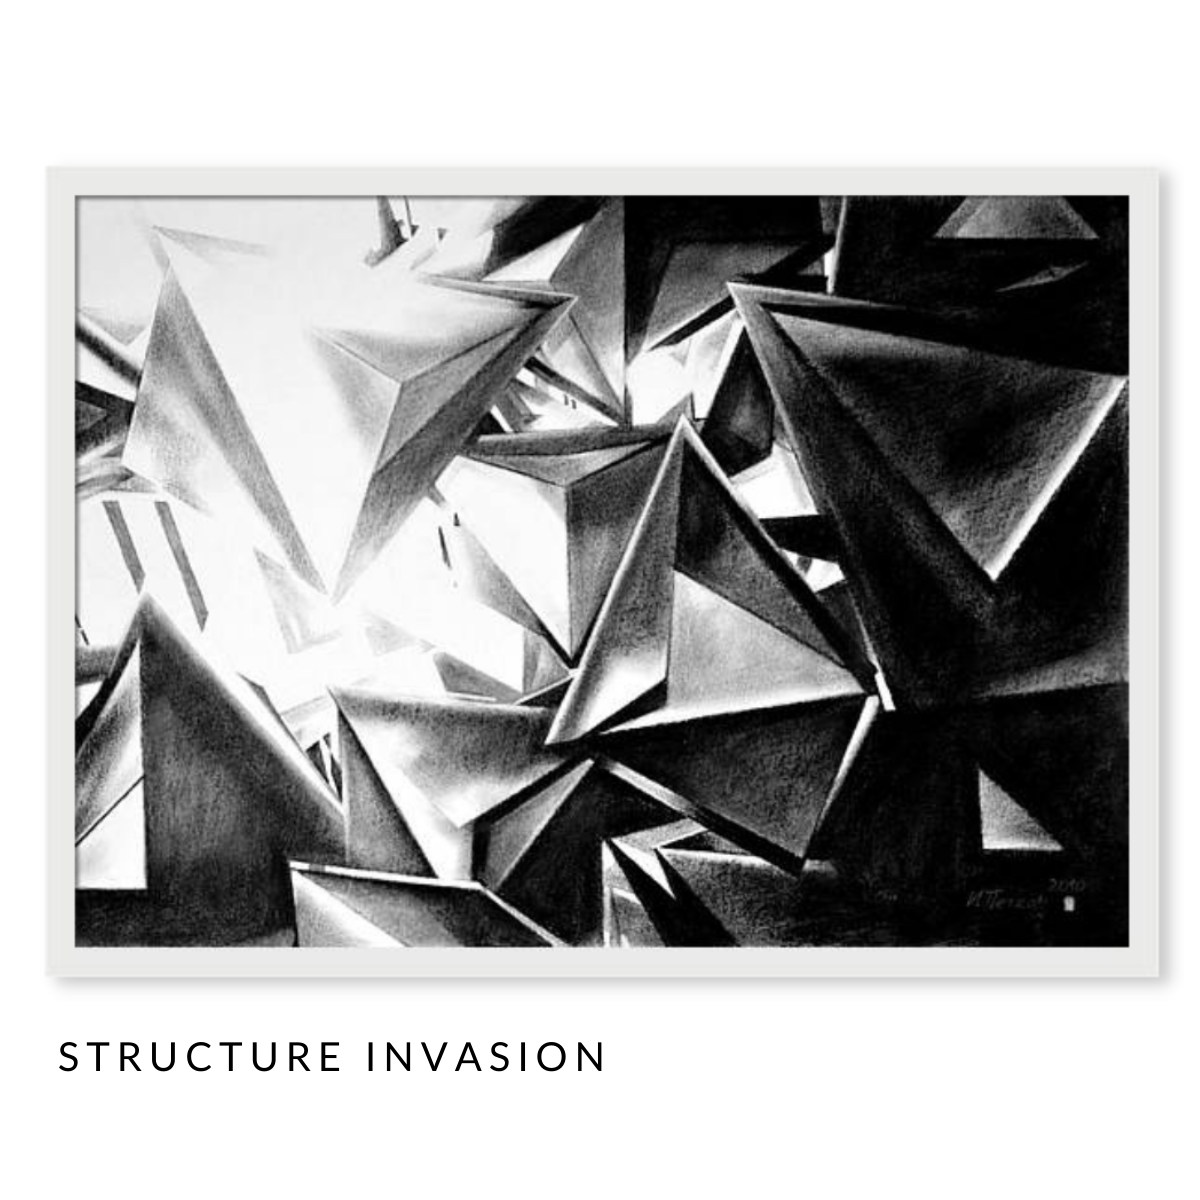 The Abridged Structures Art Series - Set of 5 Black and White Pastel Drawings